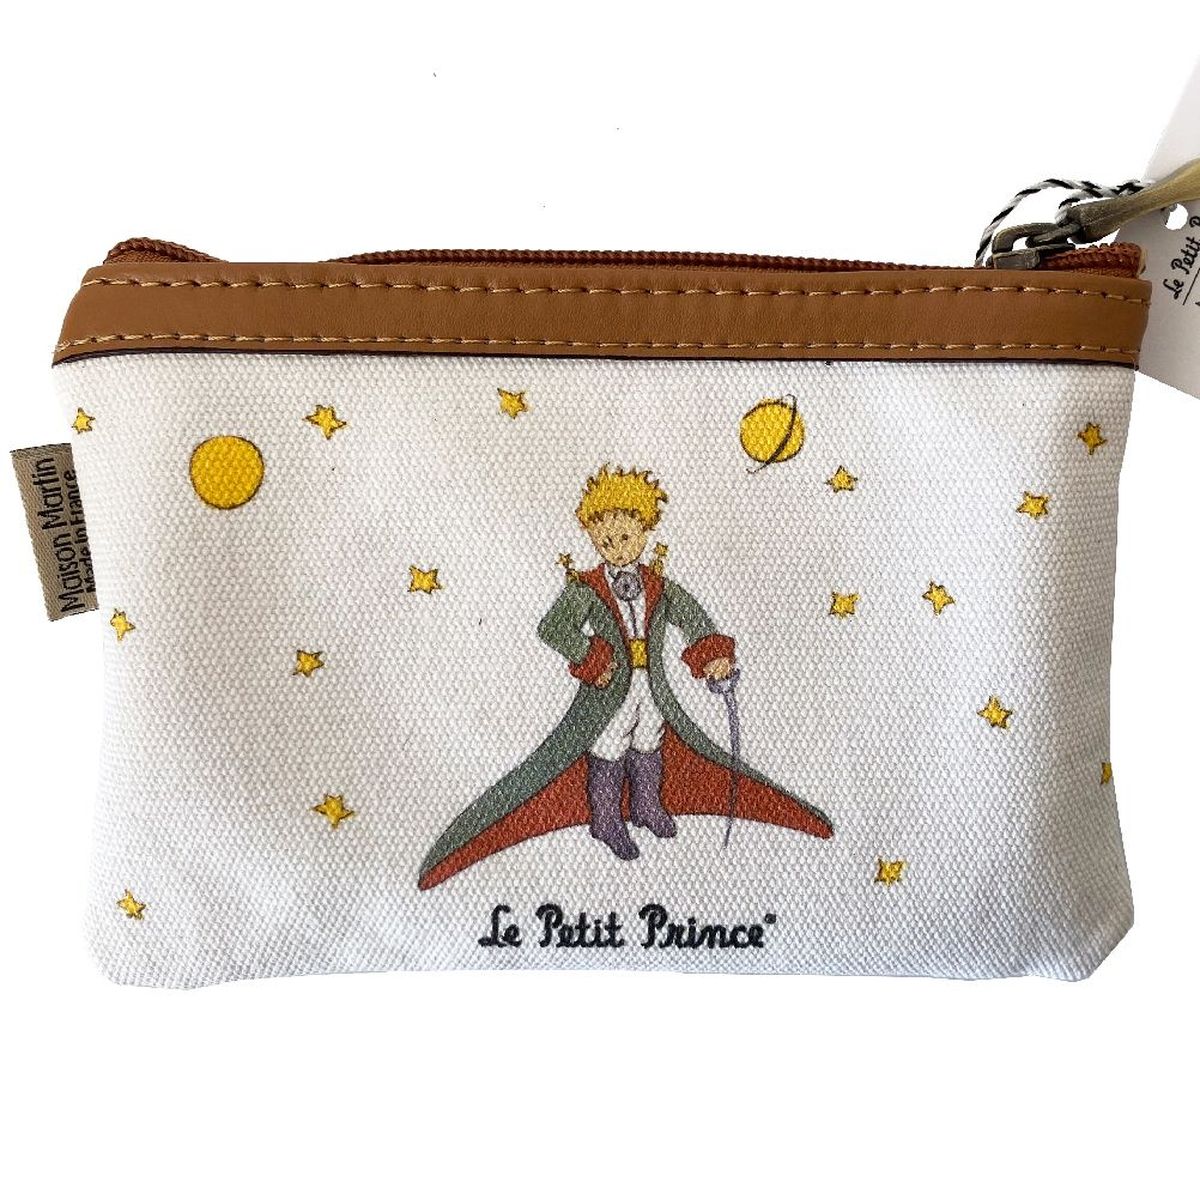 The little Prince flat pouch - Made in France